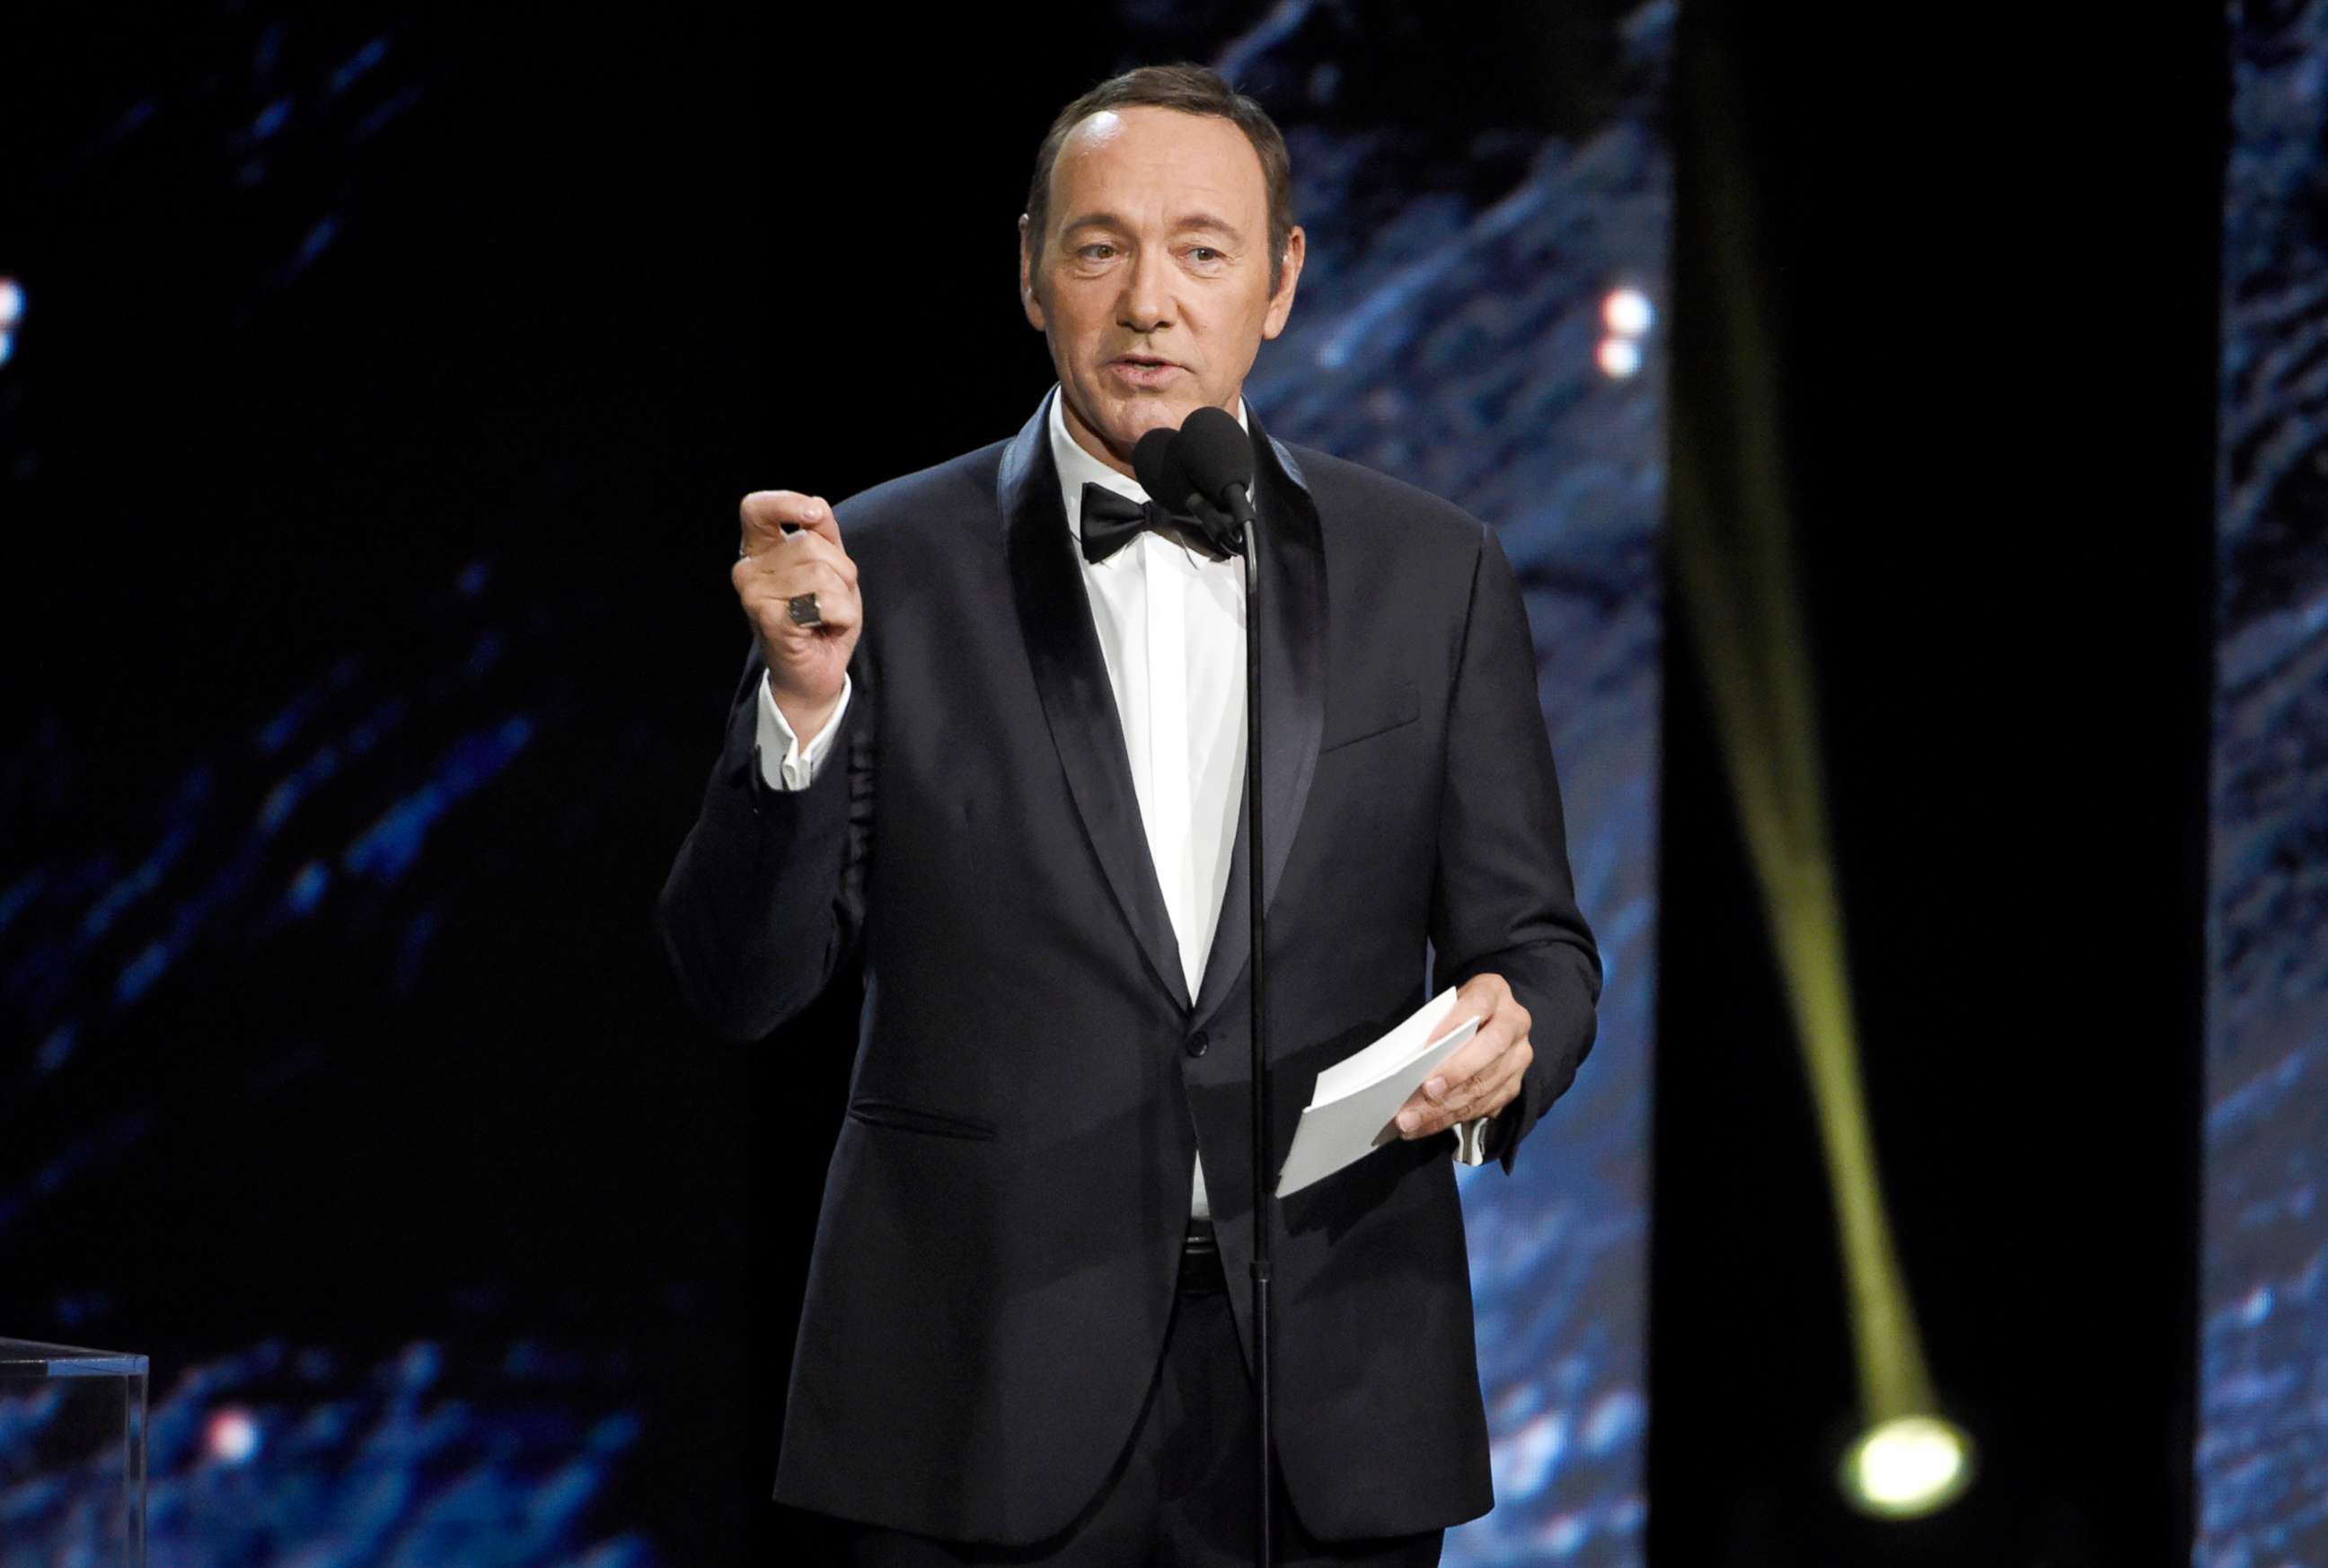 PHOTO: In this Oct. 27, 2017, file photo, Kevin Spacey presents an award in Beverly Hills, Calif.